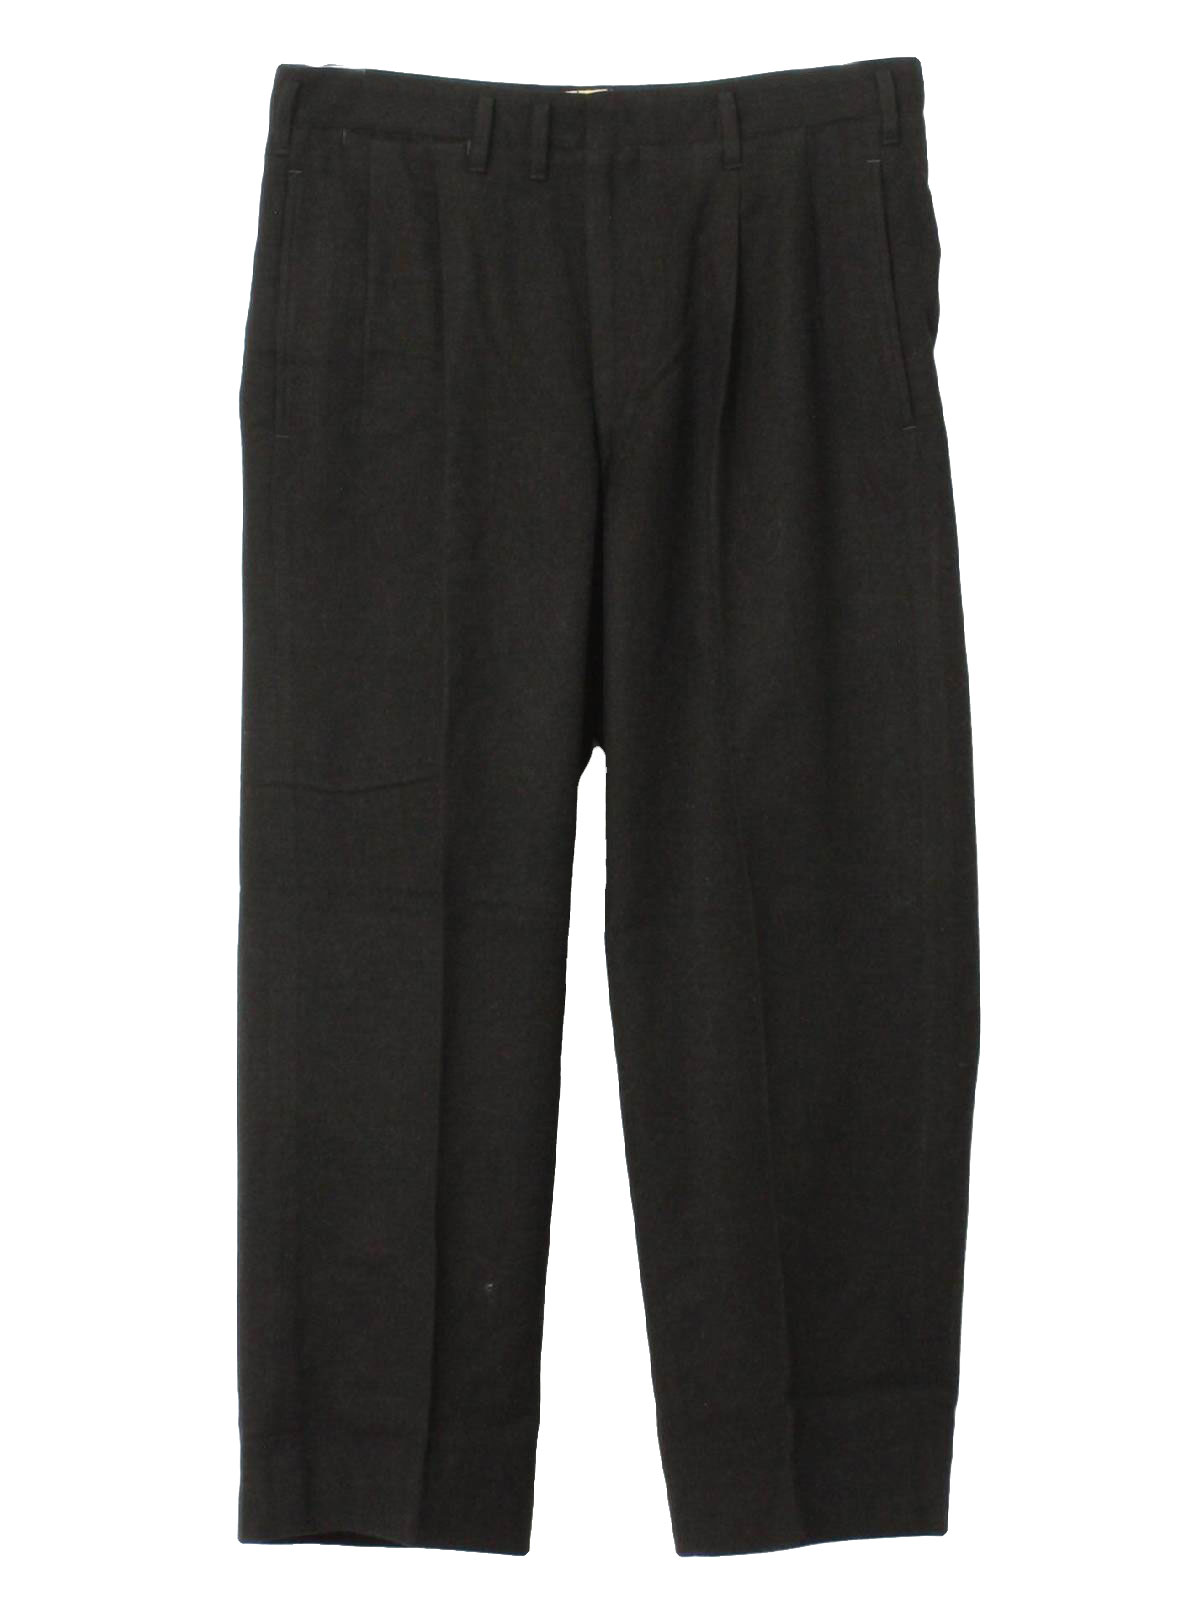 Retro Forties Pants: 40s -Missing Label- Mens black background with ...